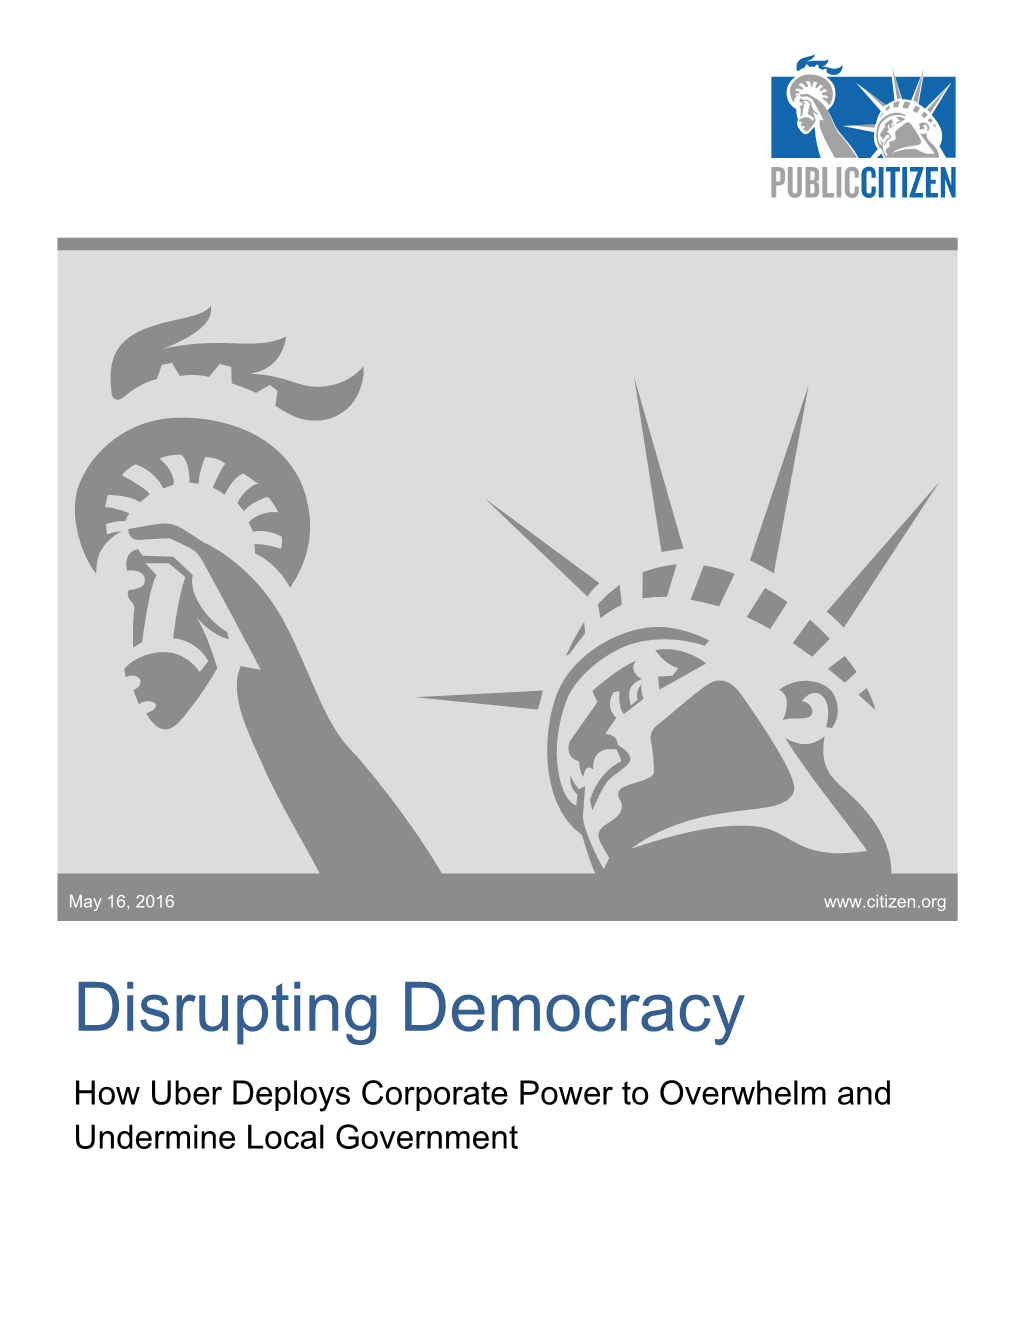 Disrupting Democracy How Uber Deploys Corporate Power to Overwhelm and Undermine Local Government